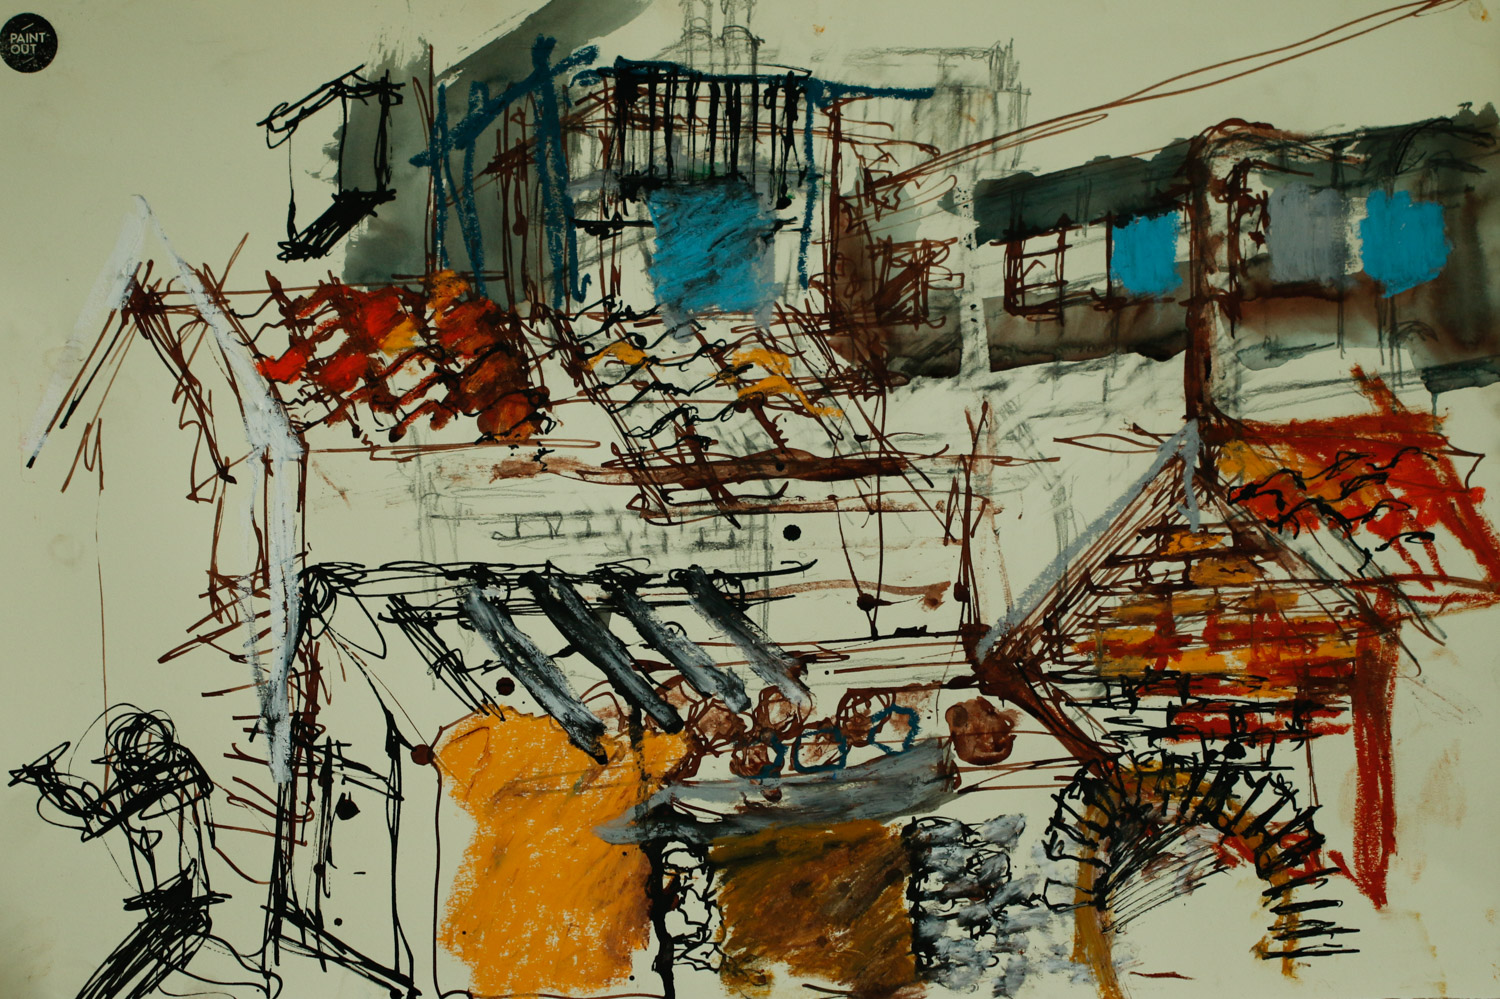 Artist Denis Clarke - Street Study, £500 20x24 Mixed Media on Paper at Paint Out Norwich 2015